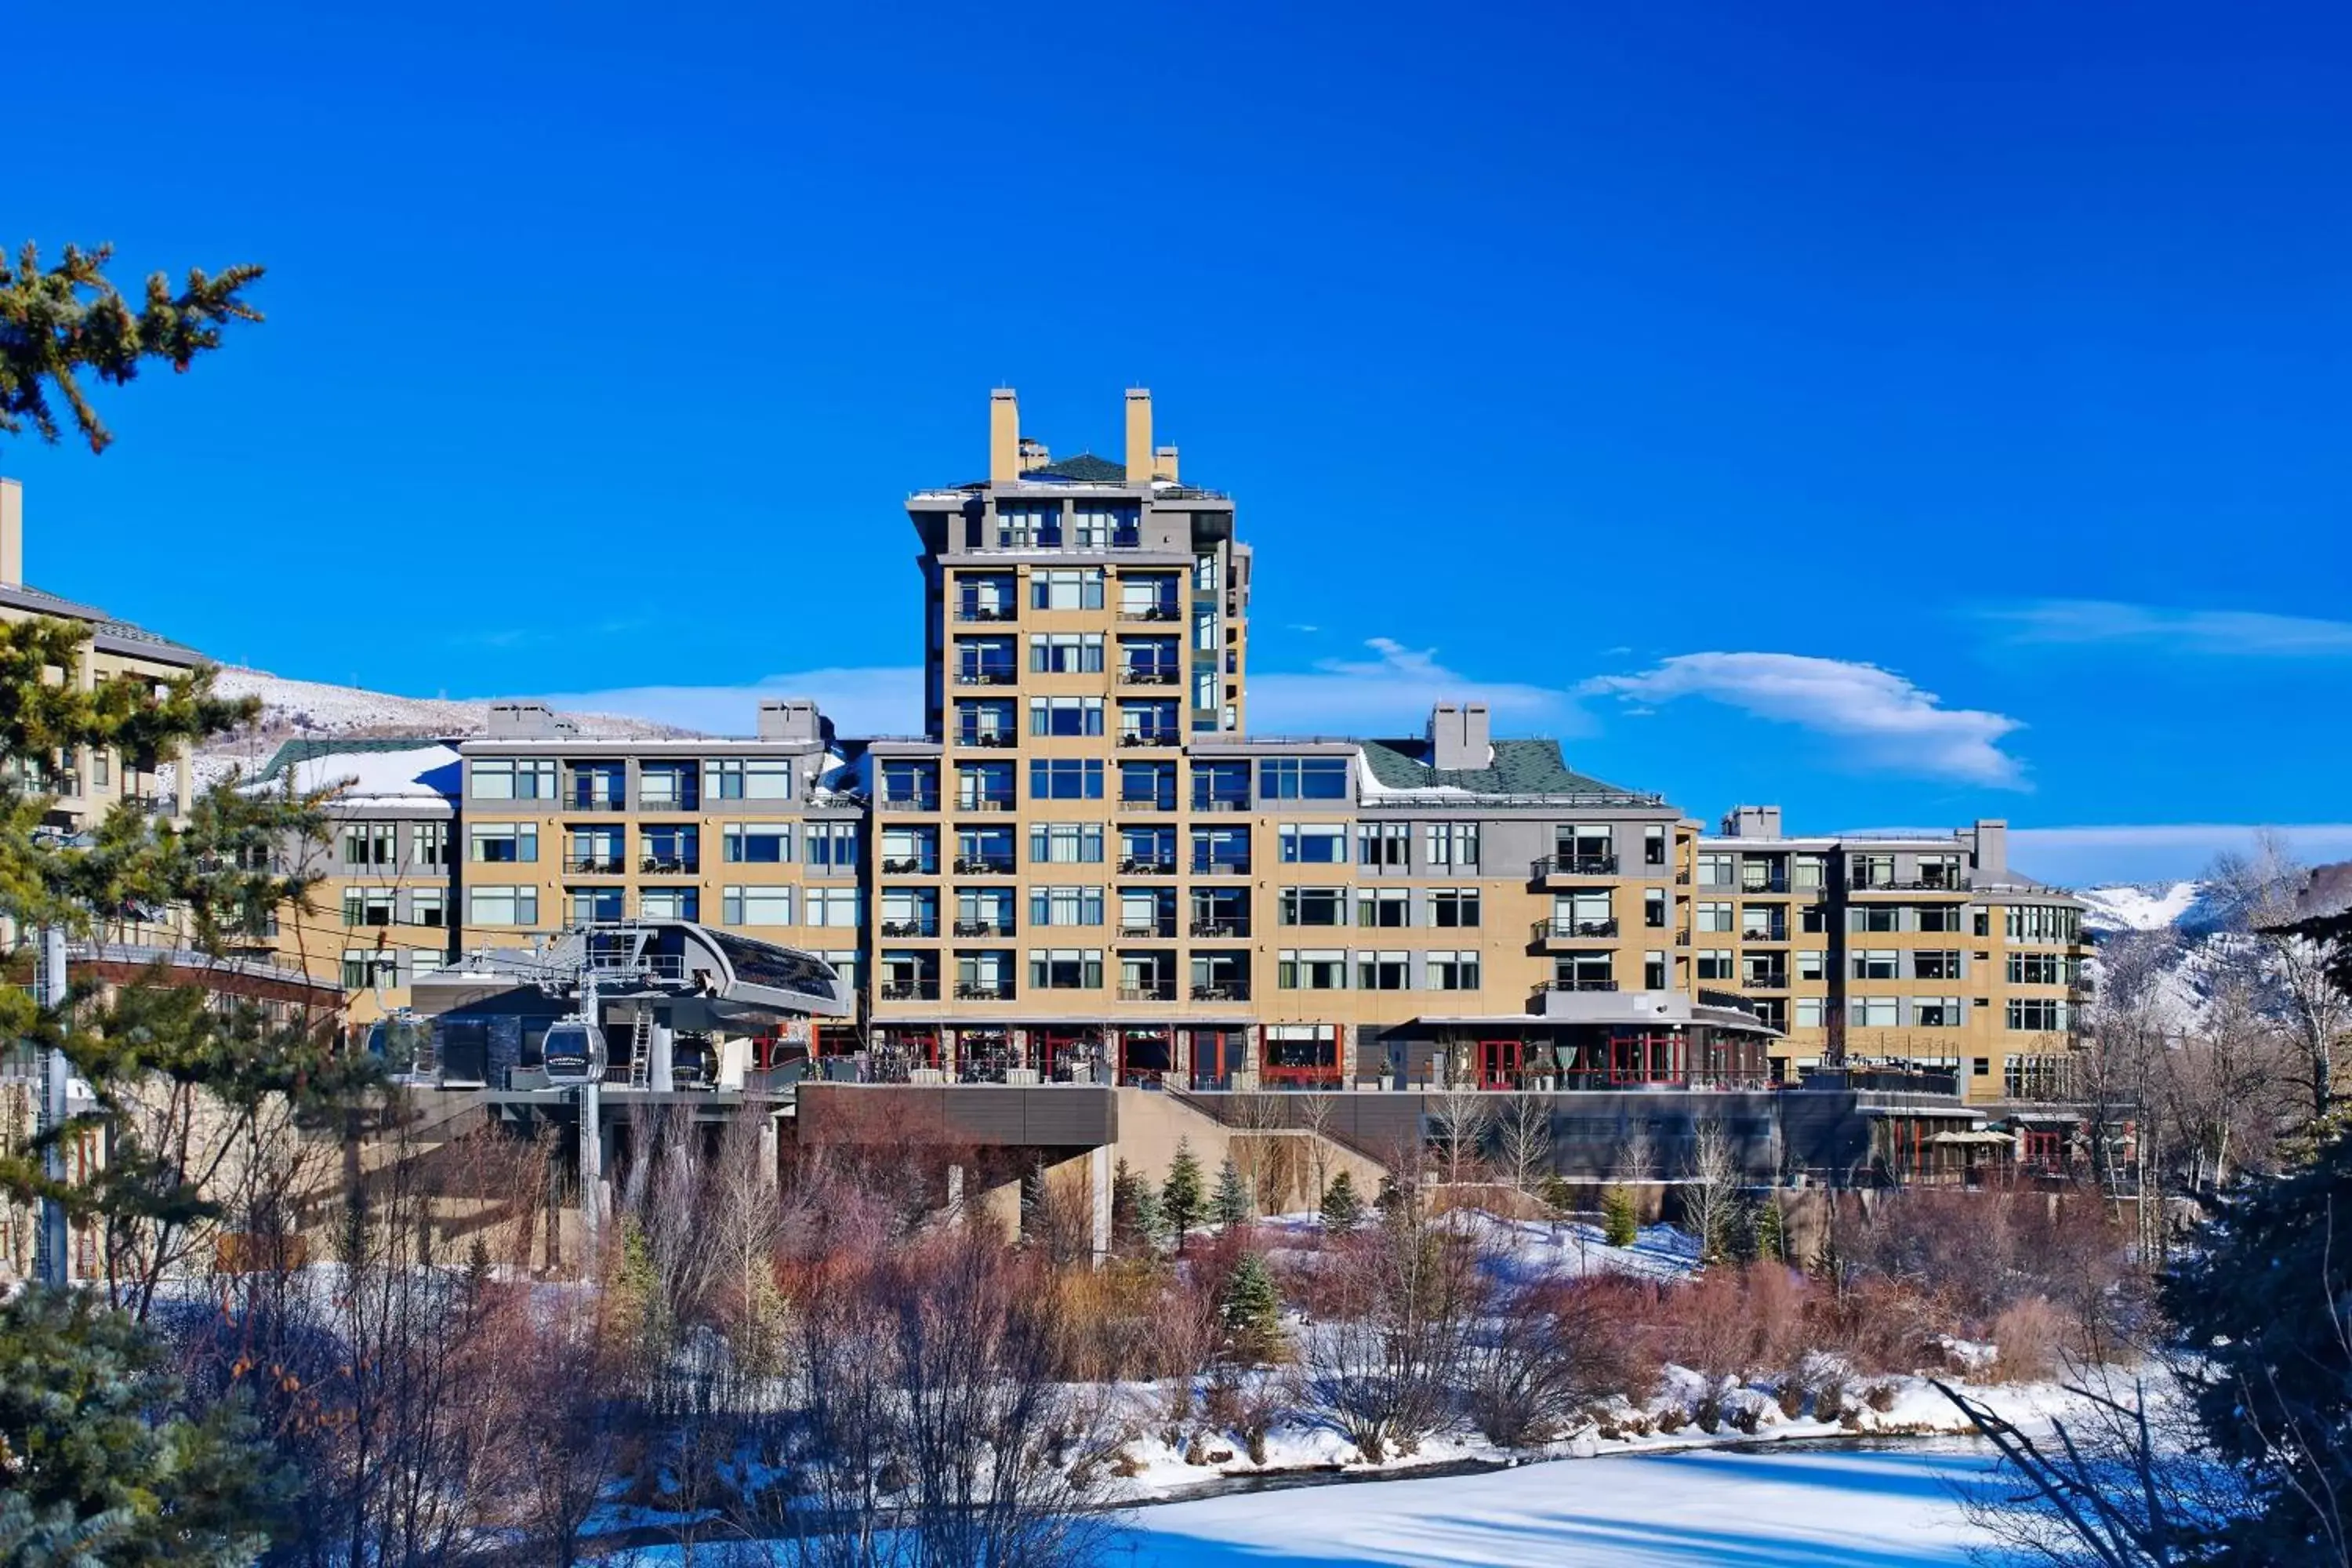 Property building in The Westin Riverfront Resort & Spa, Avon, Vail Valley